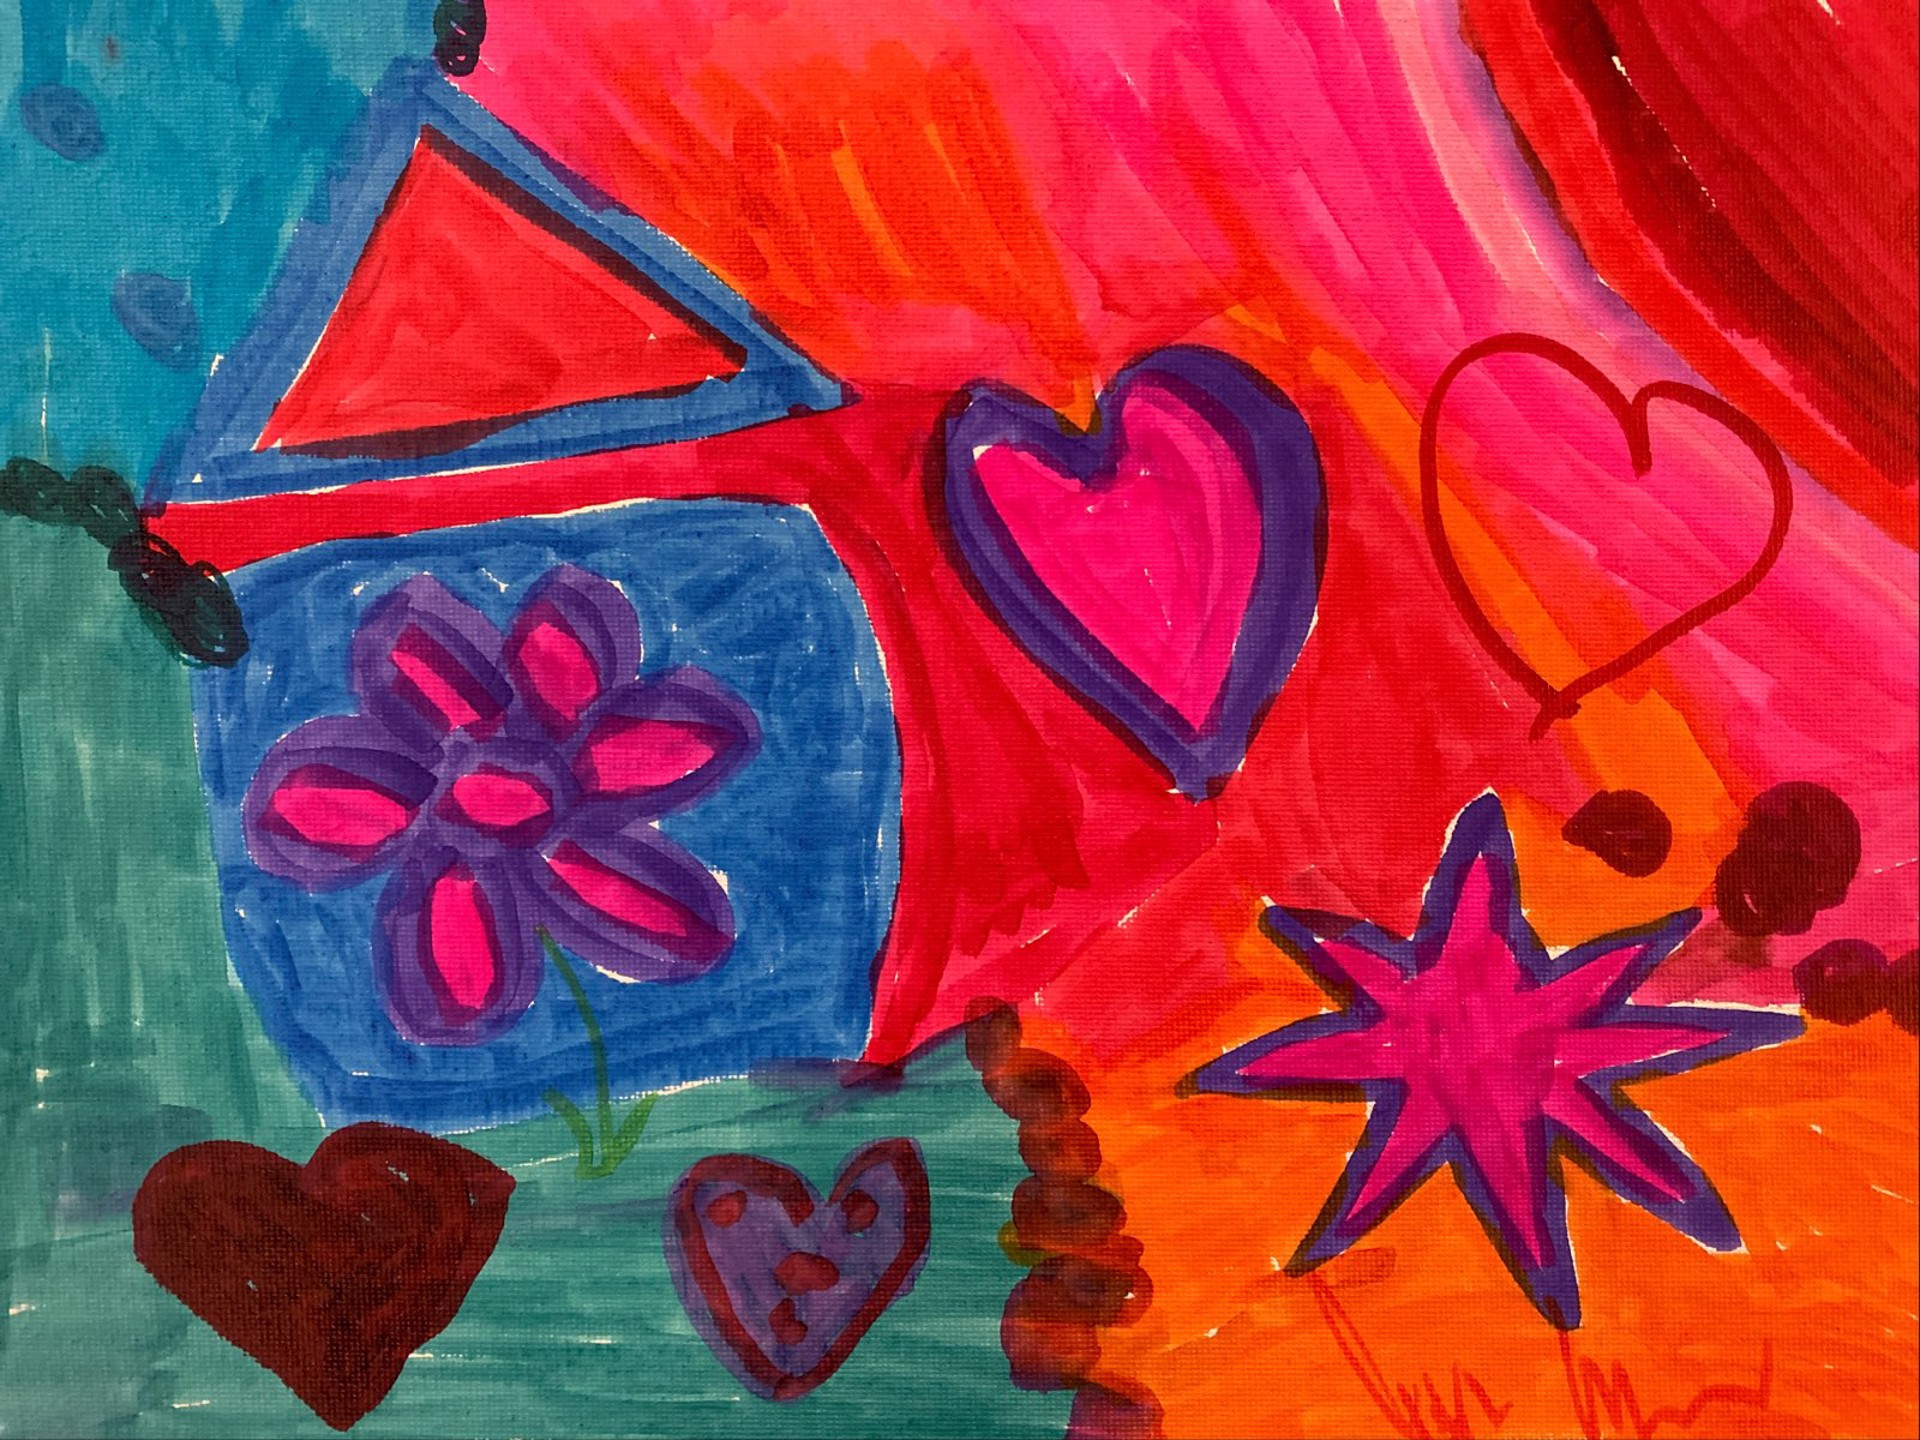 Vibrant Heart and Geometric Shapes to Brighten Your Day by Judith Berman